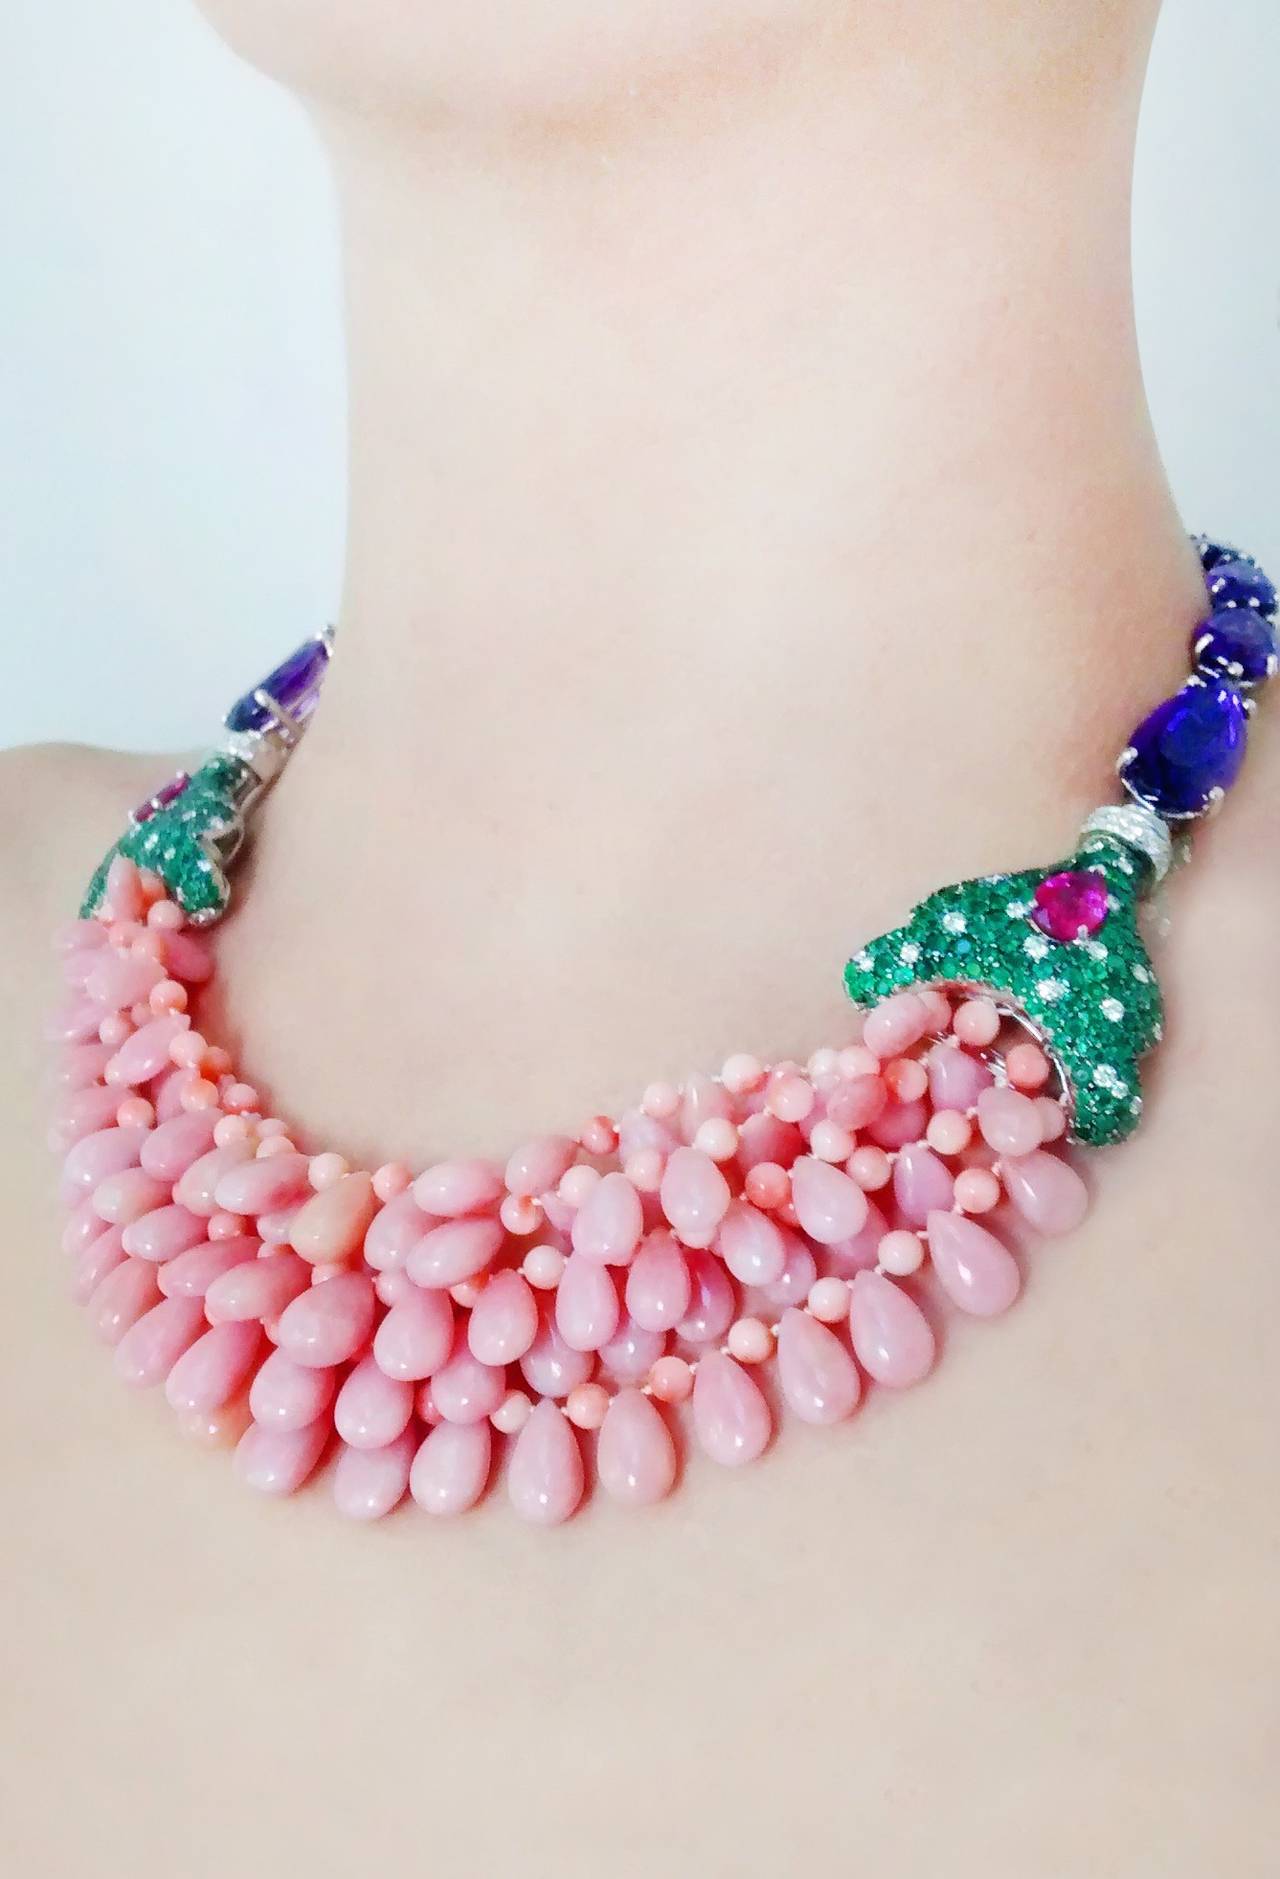 The Queen of the Nile Necklace a one-of-kind Masterpiece by Abellán New York.

In Victorian times coral necklaces were worn by young children to protect them from harm. This very grown up use of coral creatively mixes it with pink opals.

The